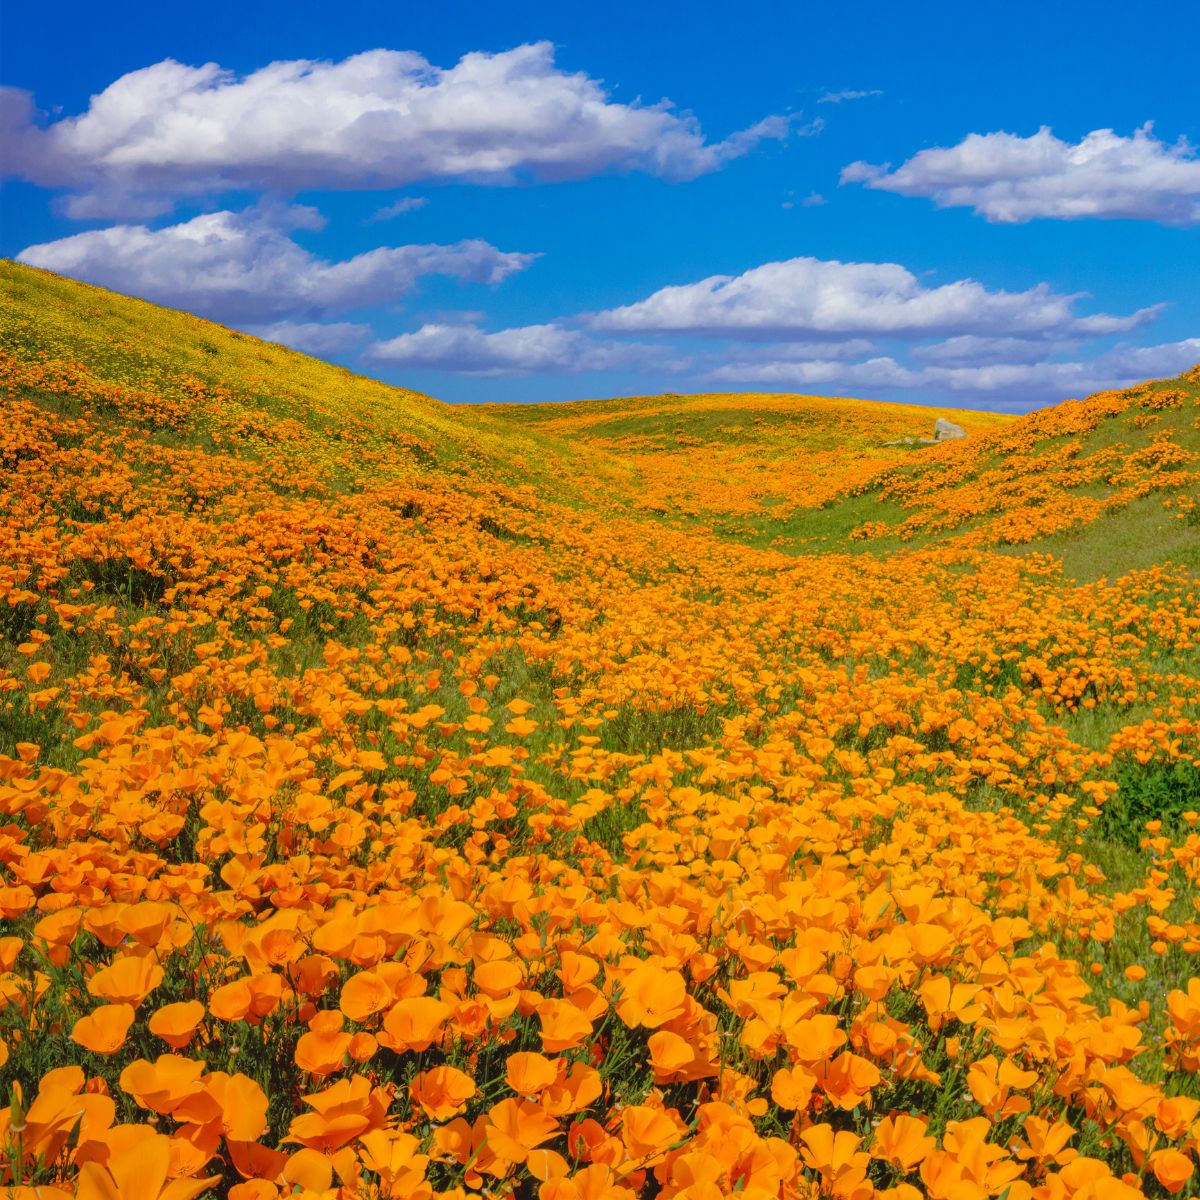 Thousands of orange poppies at the California Poppy Reserve.